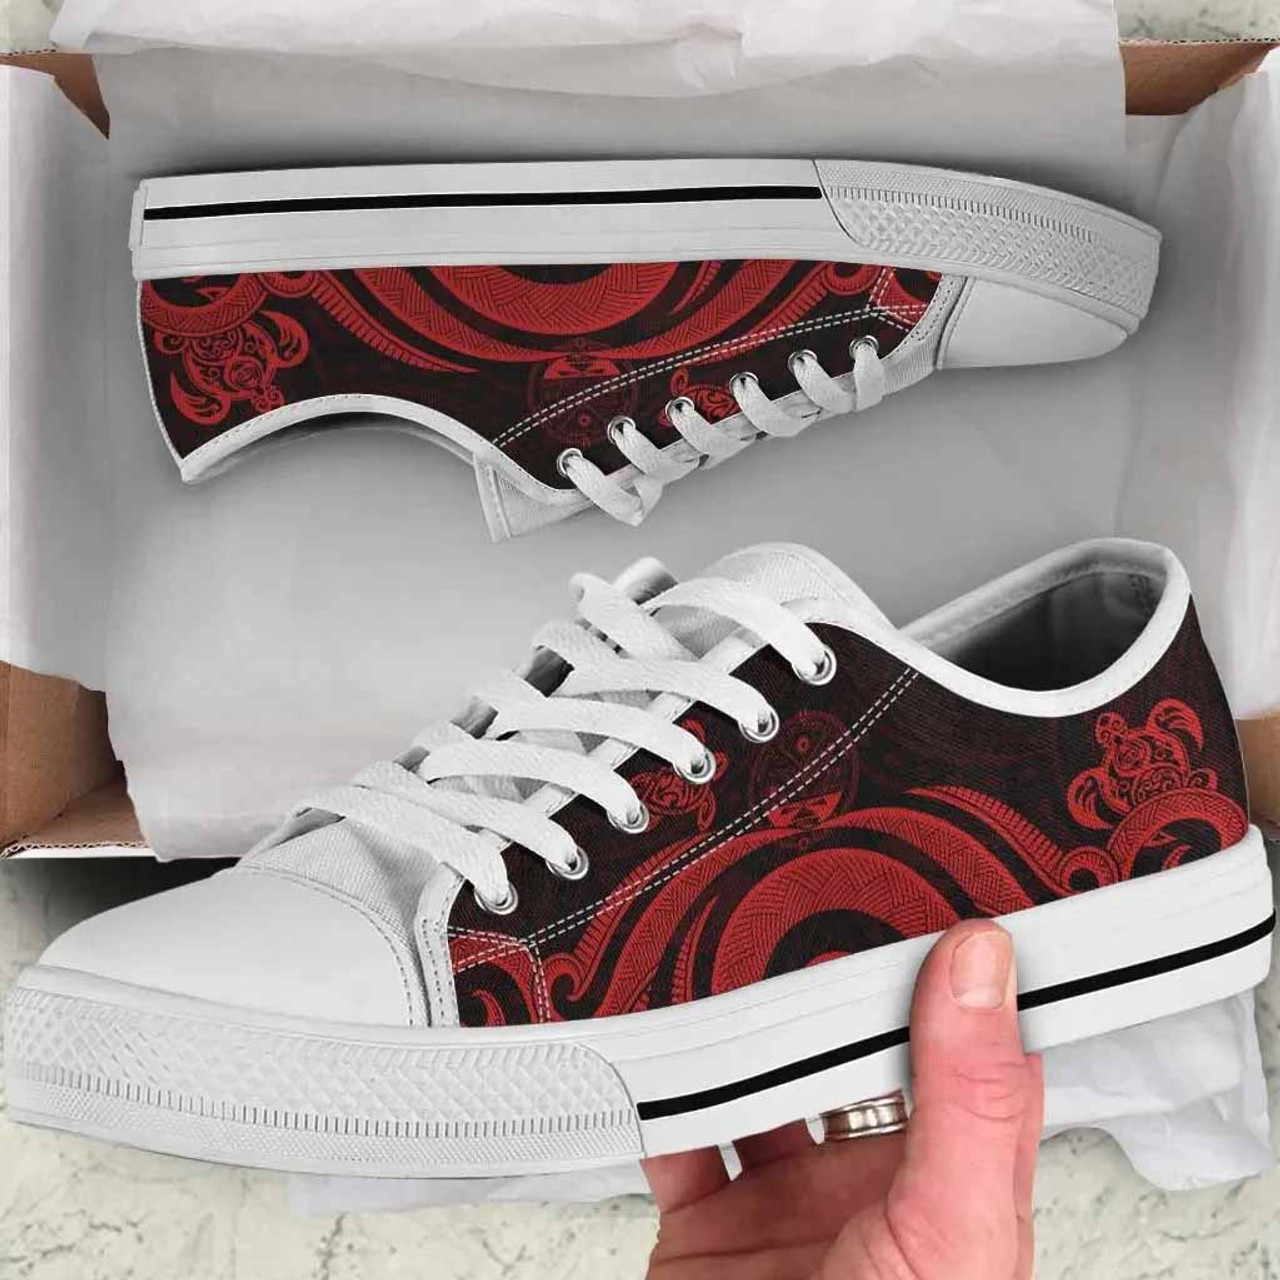 Marshall Islands Low Top Canvas Shoes - Red Tentacle Turtle Crest 5